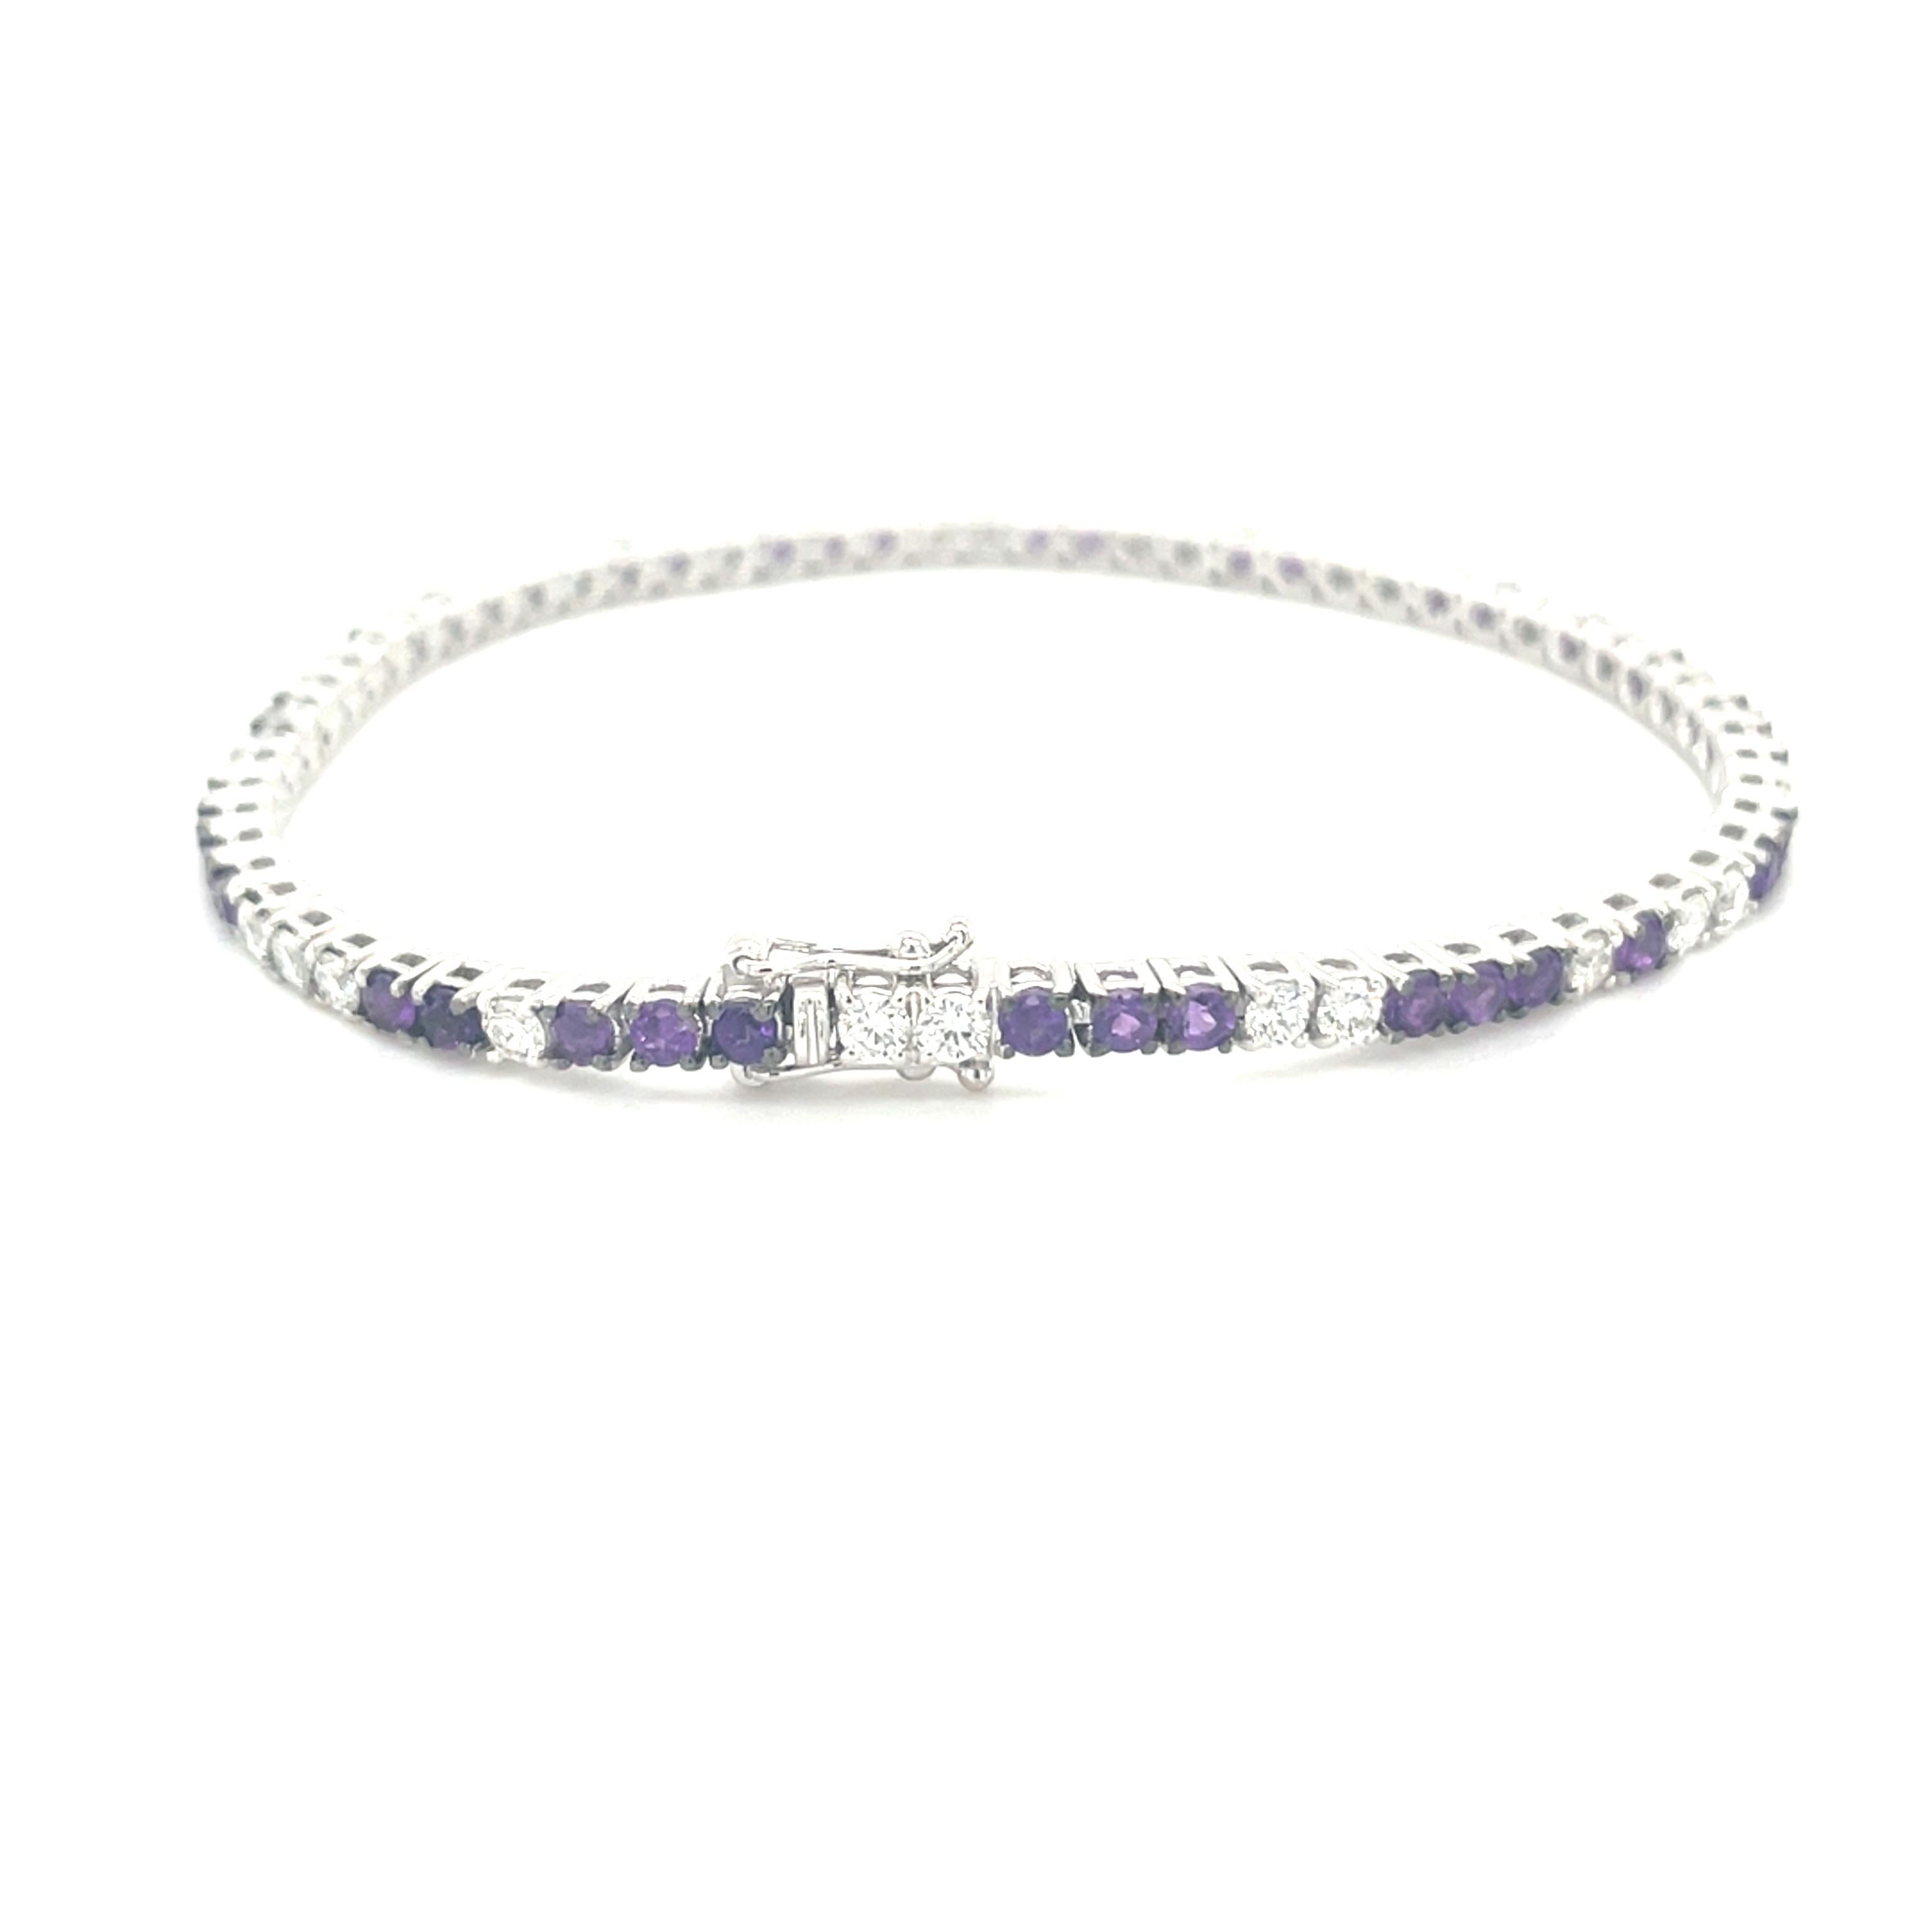 18K white gold bracelet is from our Timeless collection. This beautiful bracelet is created from natural diamonds in G color and VS2 clarity in total of 1.44 Carat and amethysts in total of 1.99 Carat. Total metal weight is 9.11 gr. The bracelet is